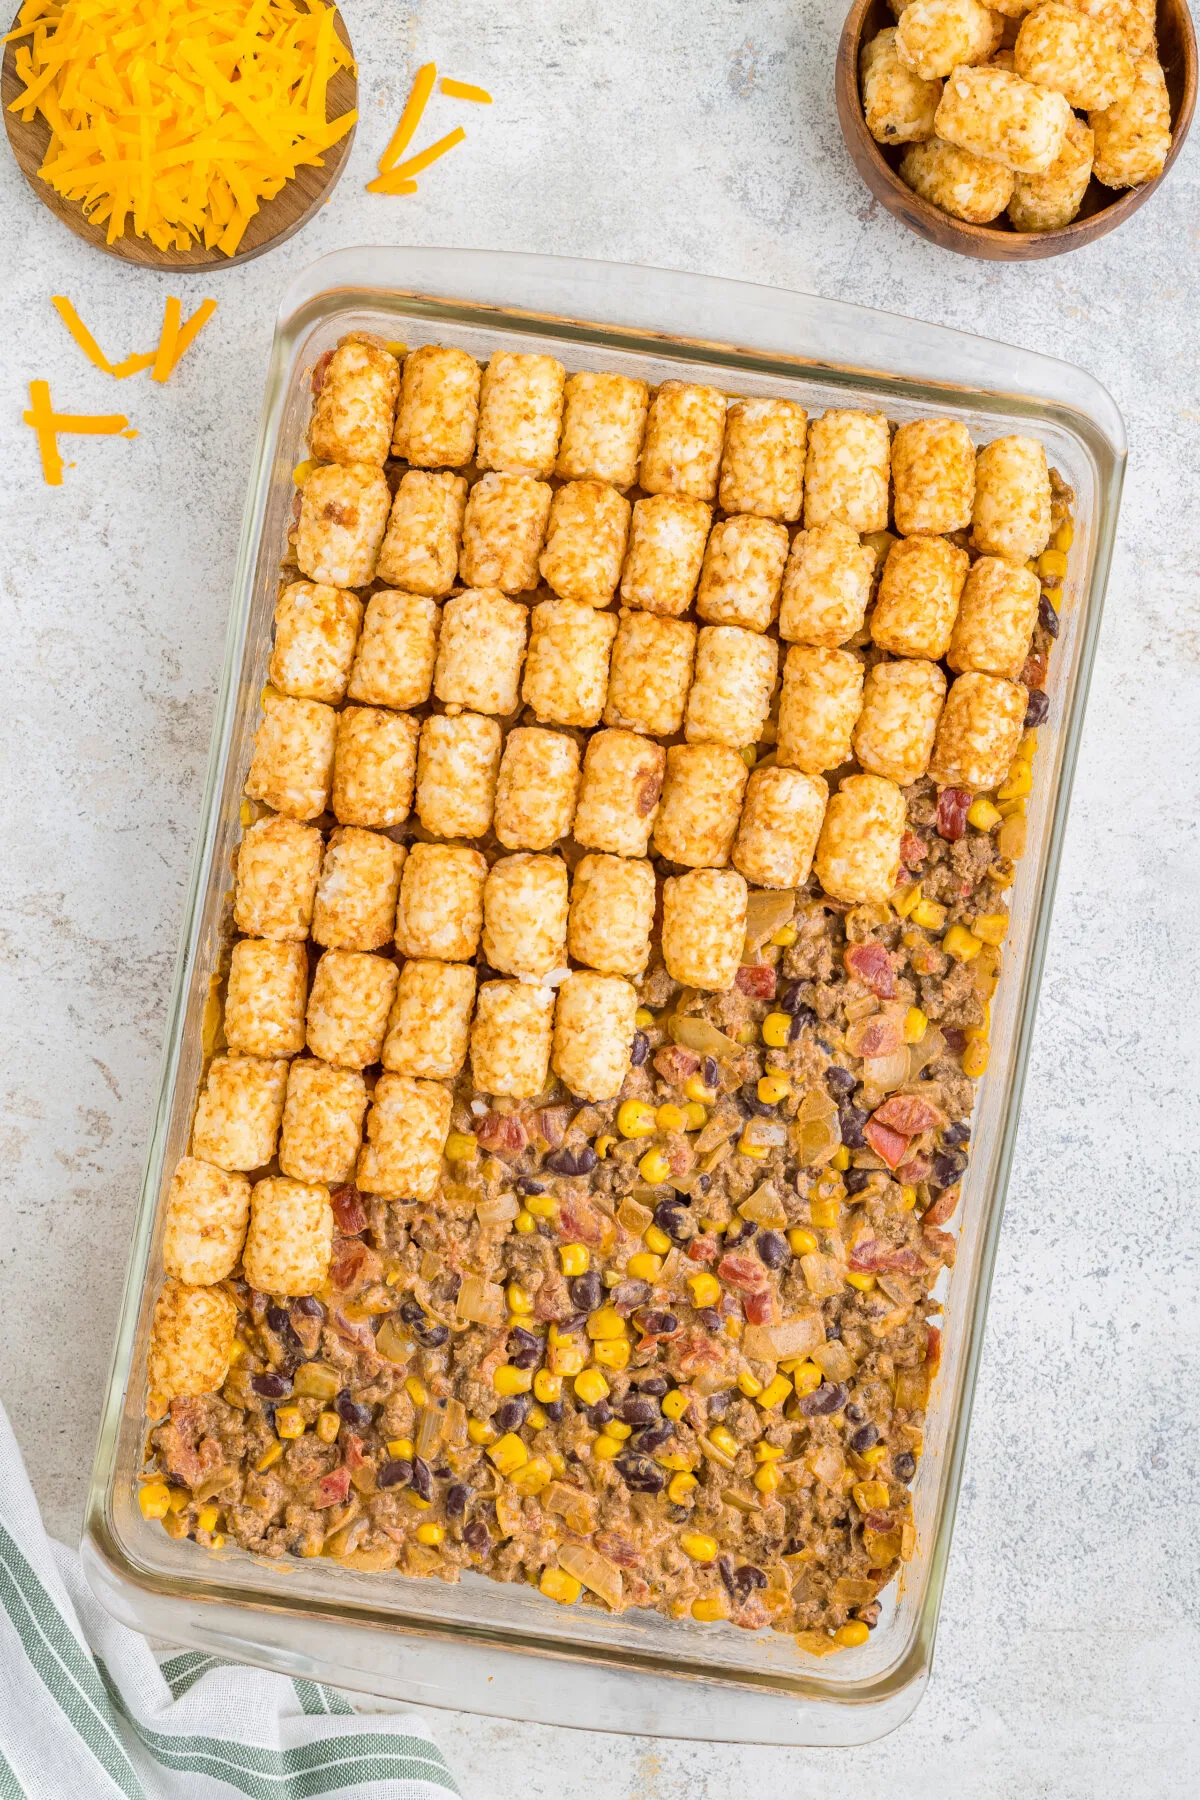 Tater tots being placed onto the casserole.